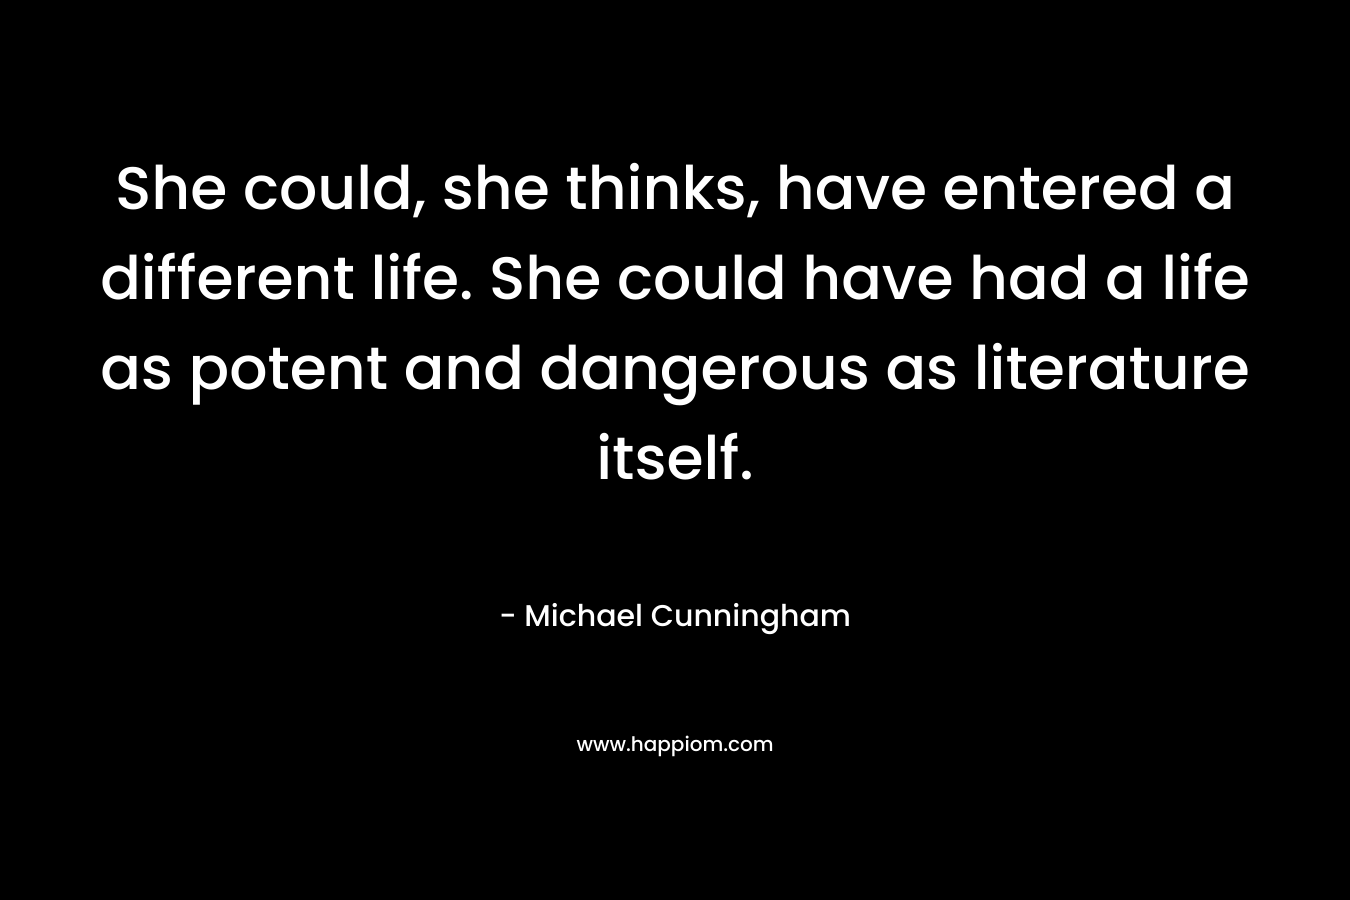 She could, she thinks, have entered a different life. She could have had a life as potent and dangerous as literature itself. – Michael Cunningham